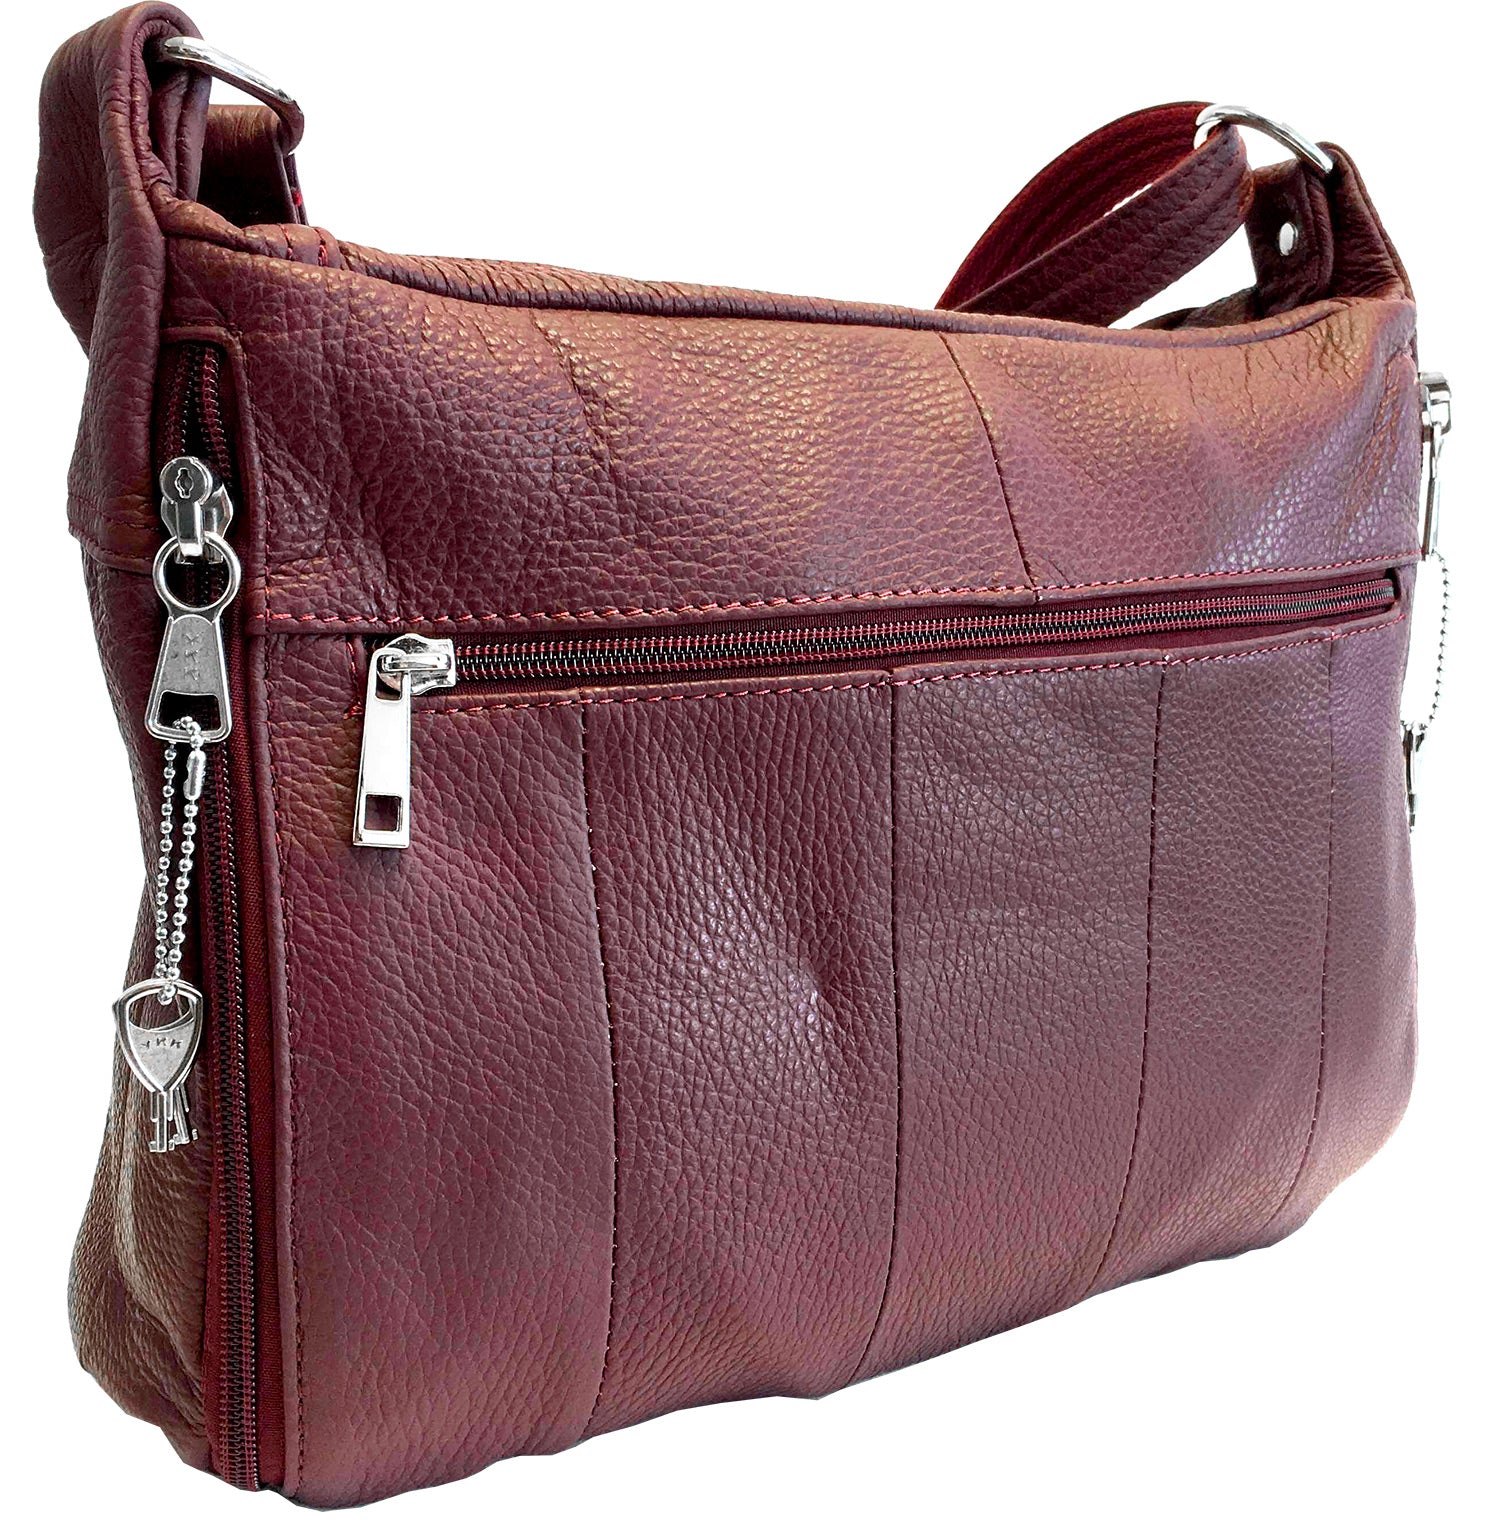 NRA Women | Top 10 Stylish & Functional Concealed Carry Purses